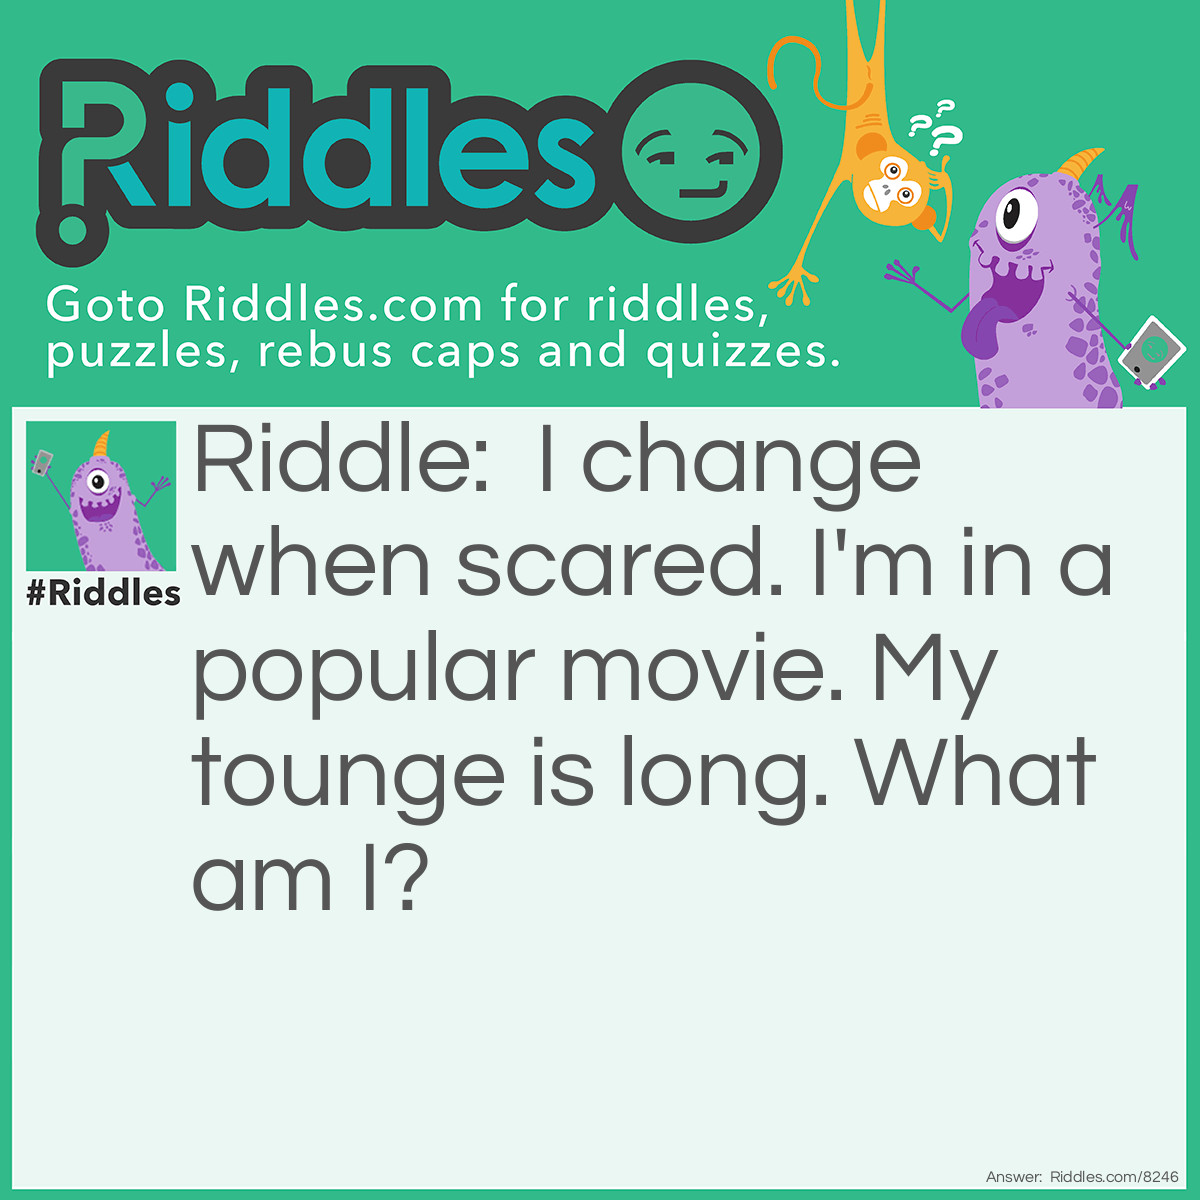 Riddle: I change when scared. I'm in a popular movie. My tounge is long. What am I? Answer: A chameleon.